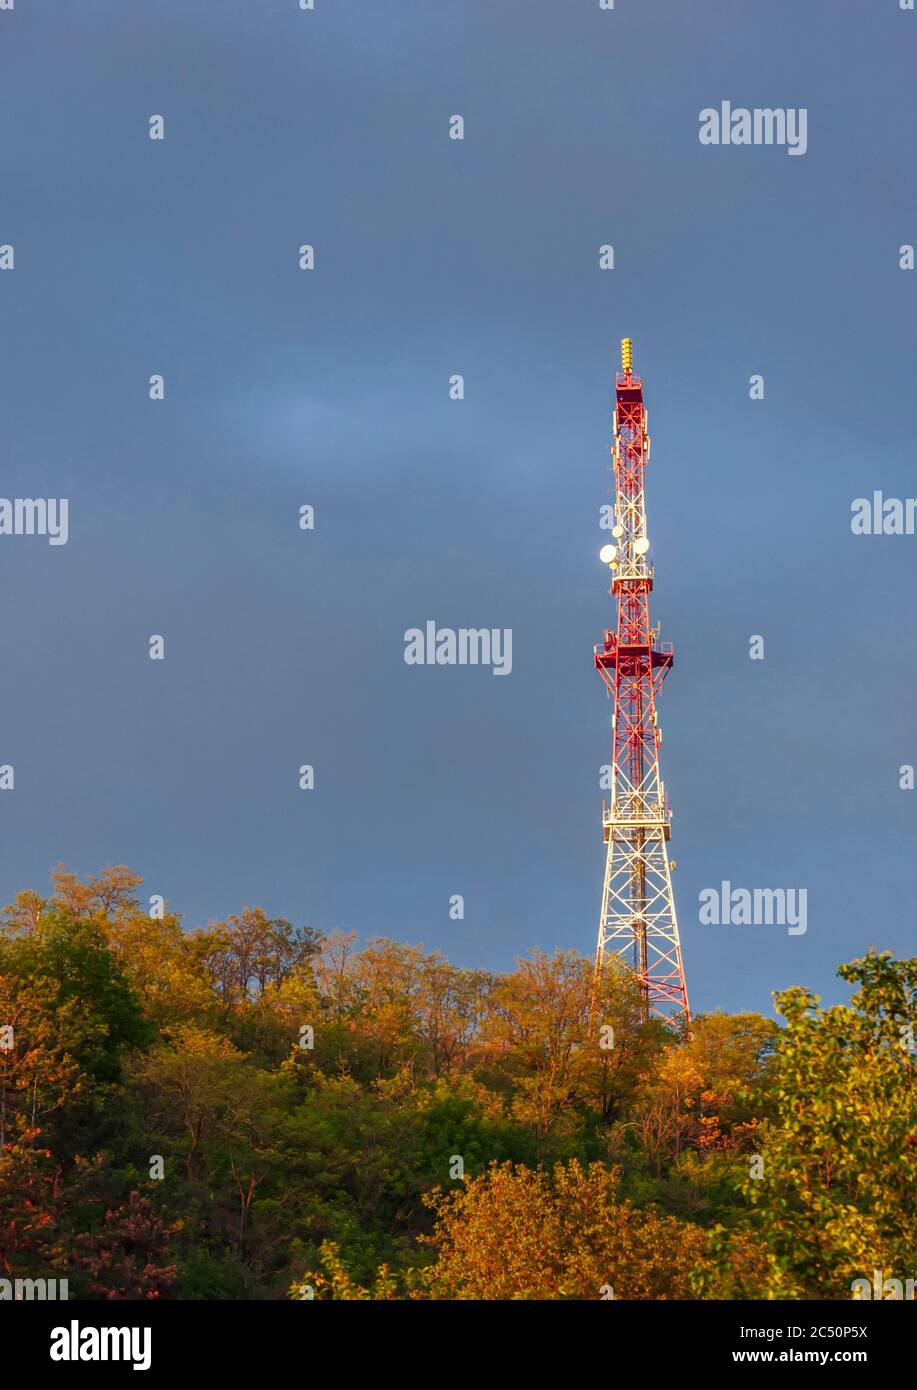 radio tower on a hill on evening sky background after storm rain Stock Photo